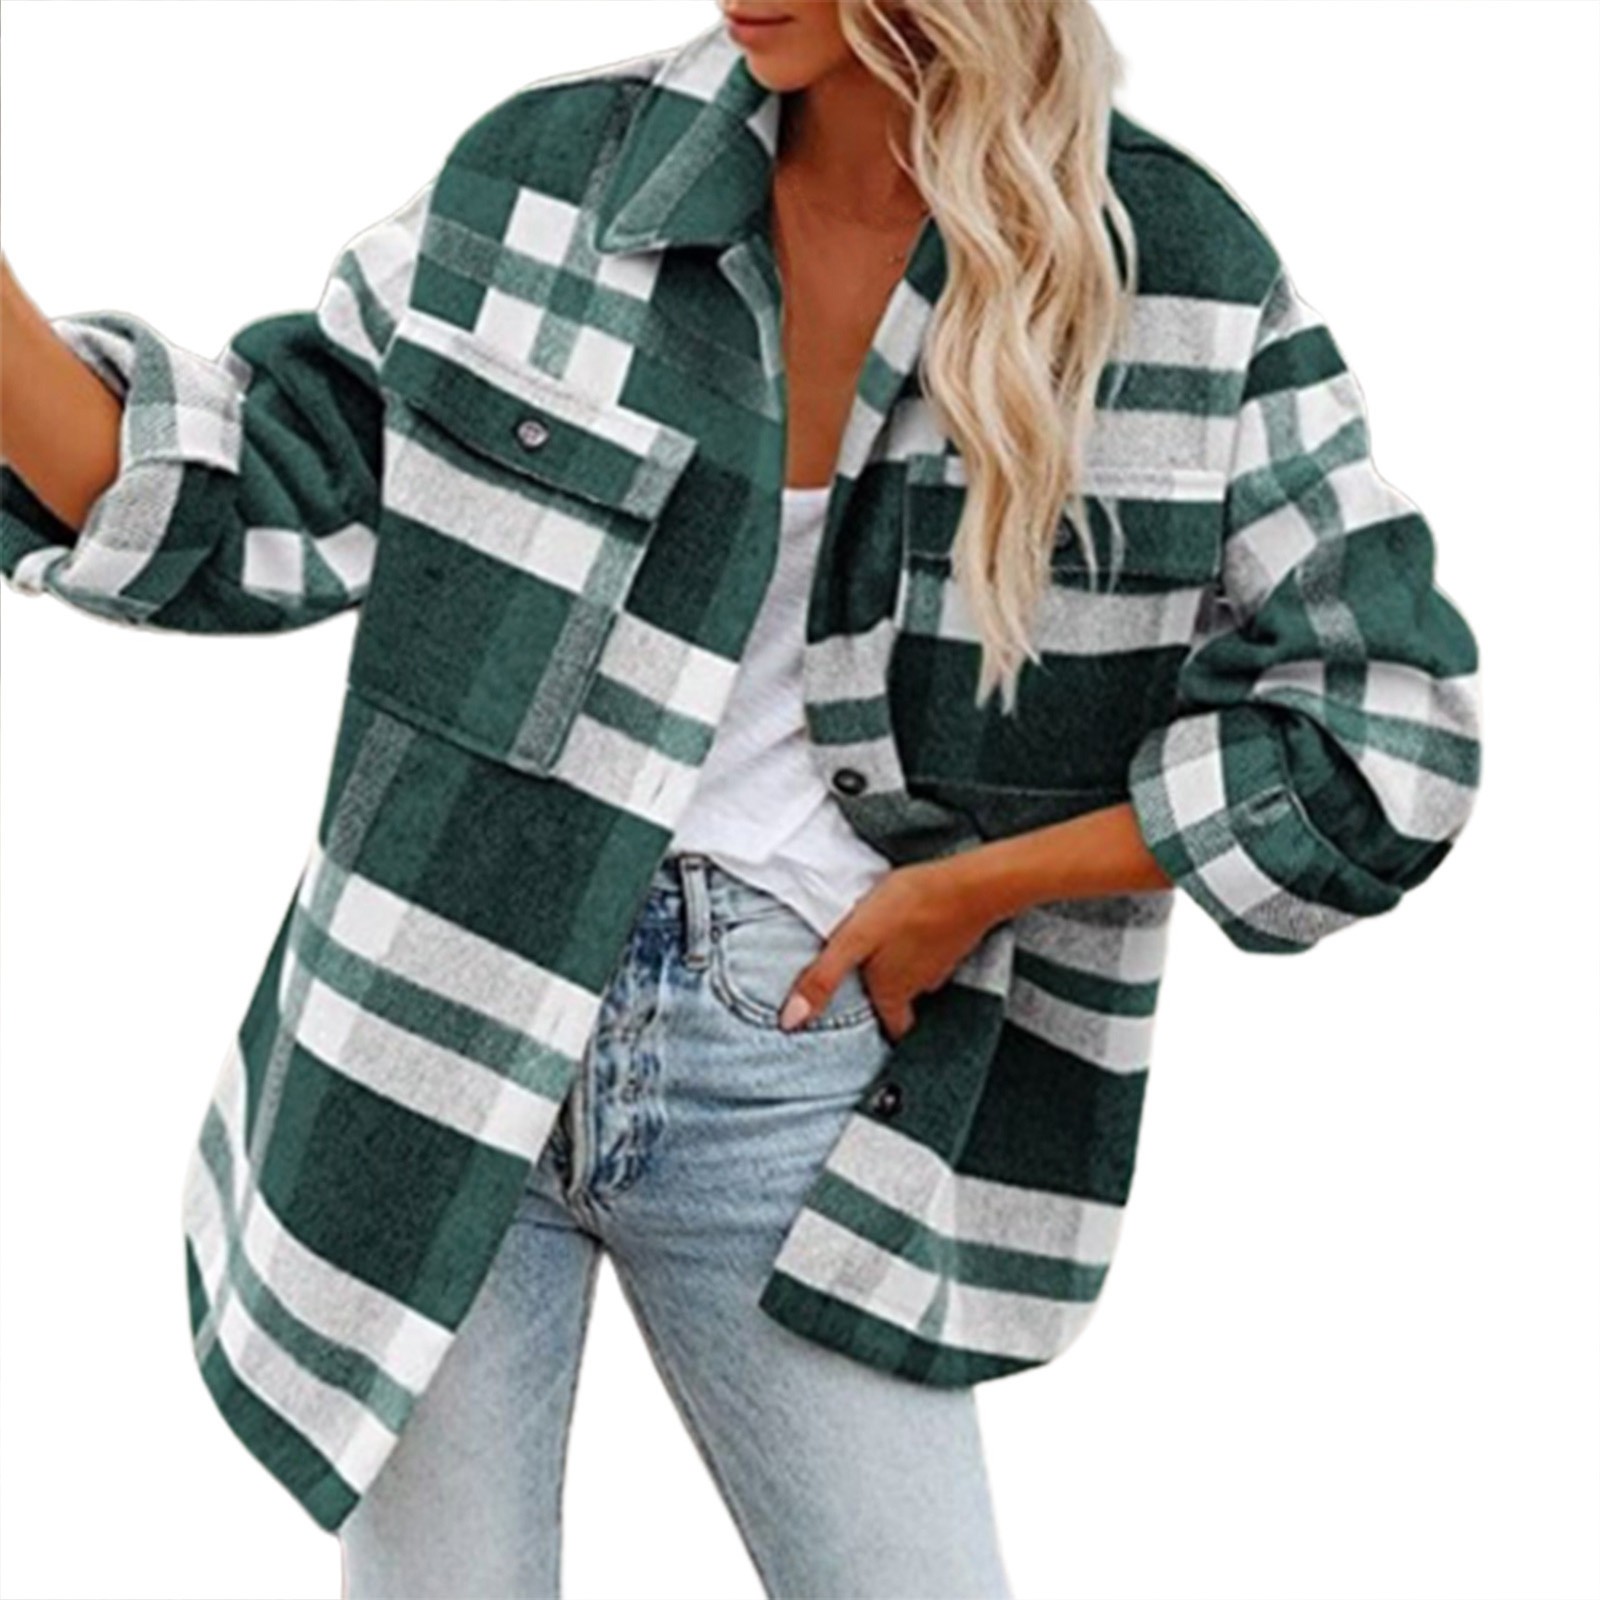 Black and Friday Deals Girls Winter Coats Checkered Print Cardigan Coat Ladies Long Sleeve Jackets Turn-down Collar Suit Woolen Coat Outwear,Green,Large - image 1 of 1